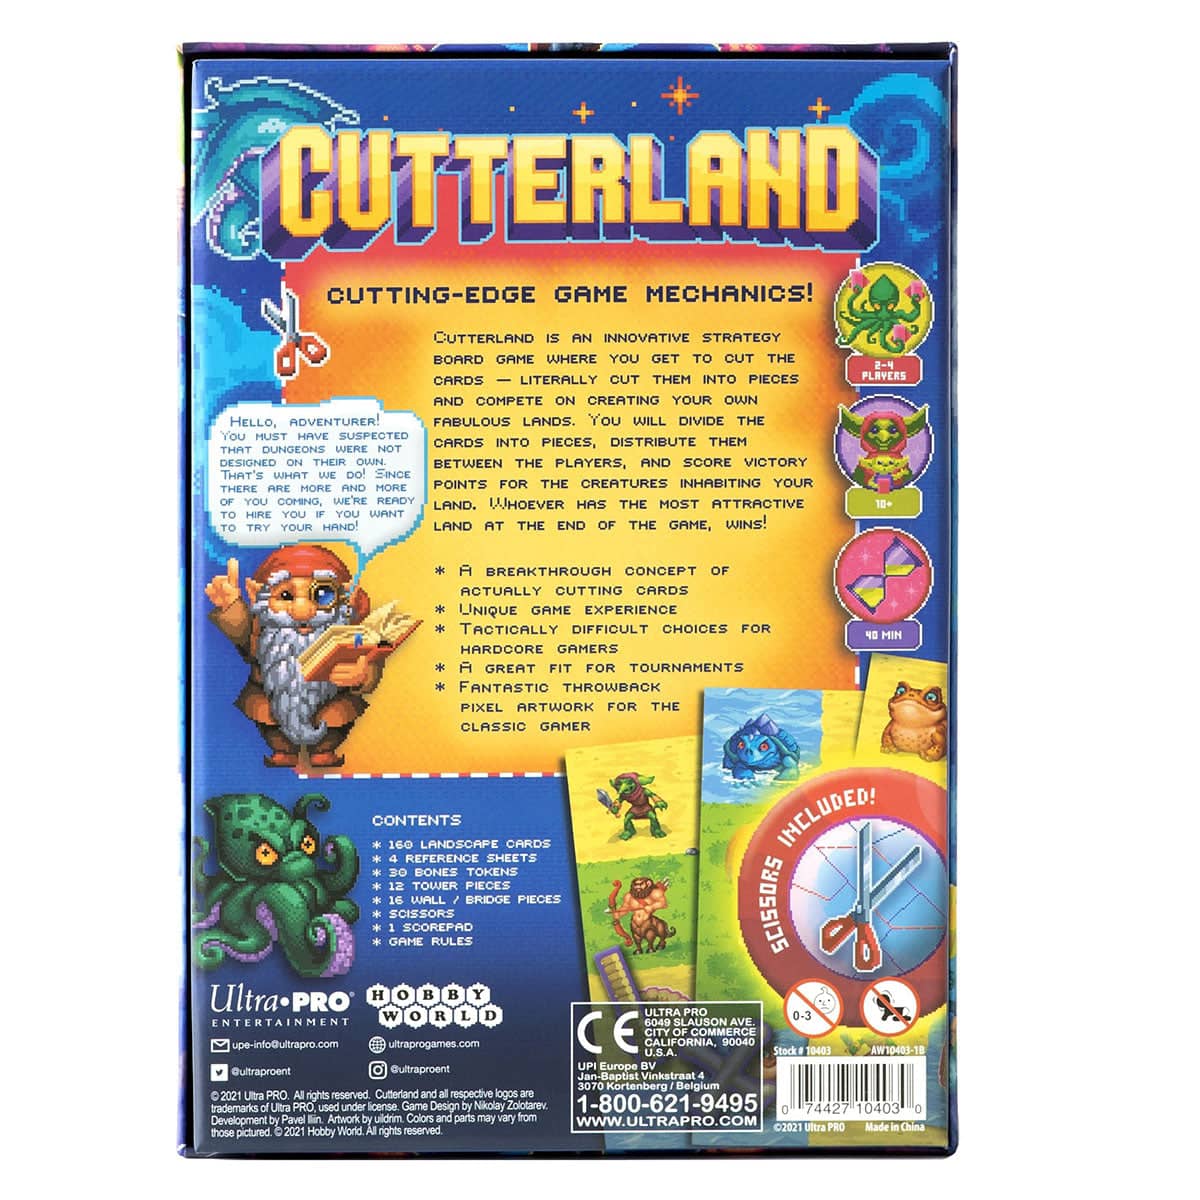 Cutterland | A card cutting game for ages 10 and up | Ultra PRO Entertainment